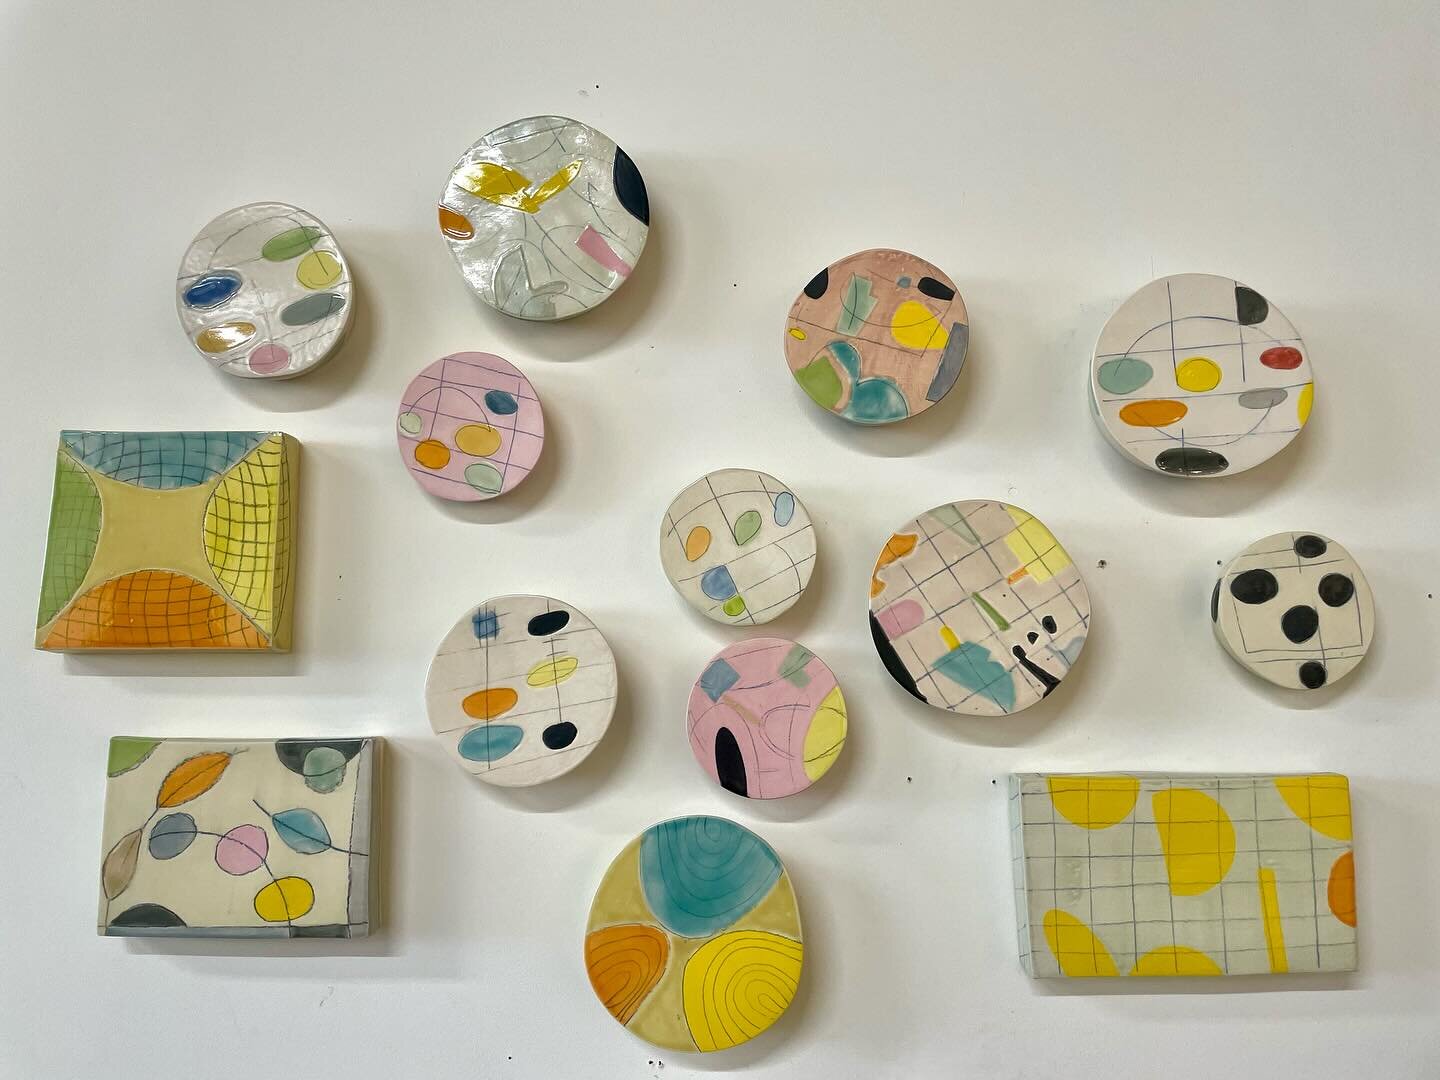 Wall of Discs and Squares- studio Holiday Sale is coming up and studio is getting ready!  Saturday, December 2nd  110:00-5:00pm and Sunday,  December 3rd 12:00-5:00pm.  3620 Perkins Ave Cleveland, Ohio 44114
Judith Salomon- Ceramics  Garie Waltzer- P